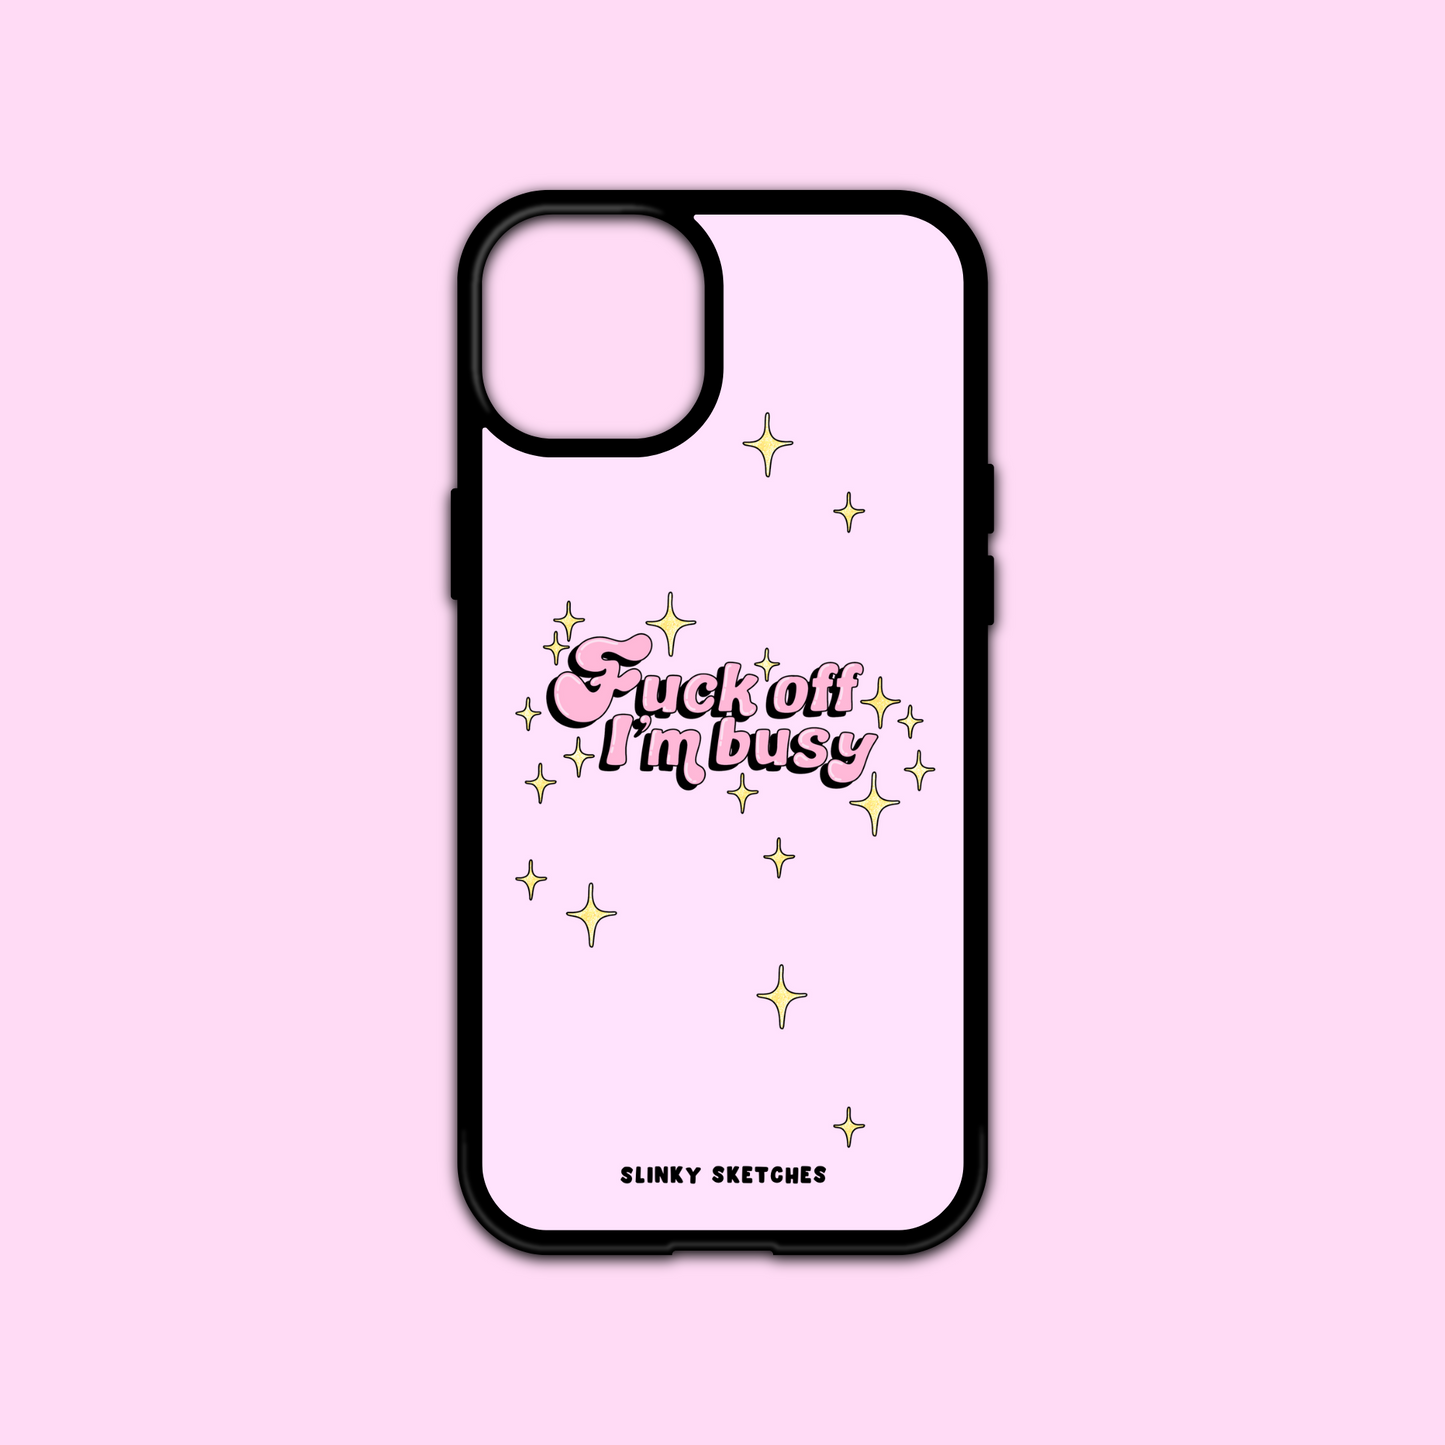 I'm Busy Phone Case